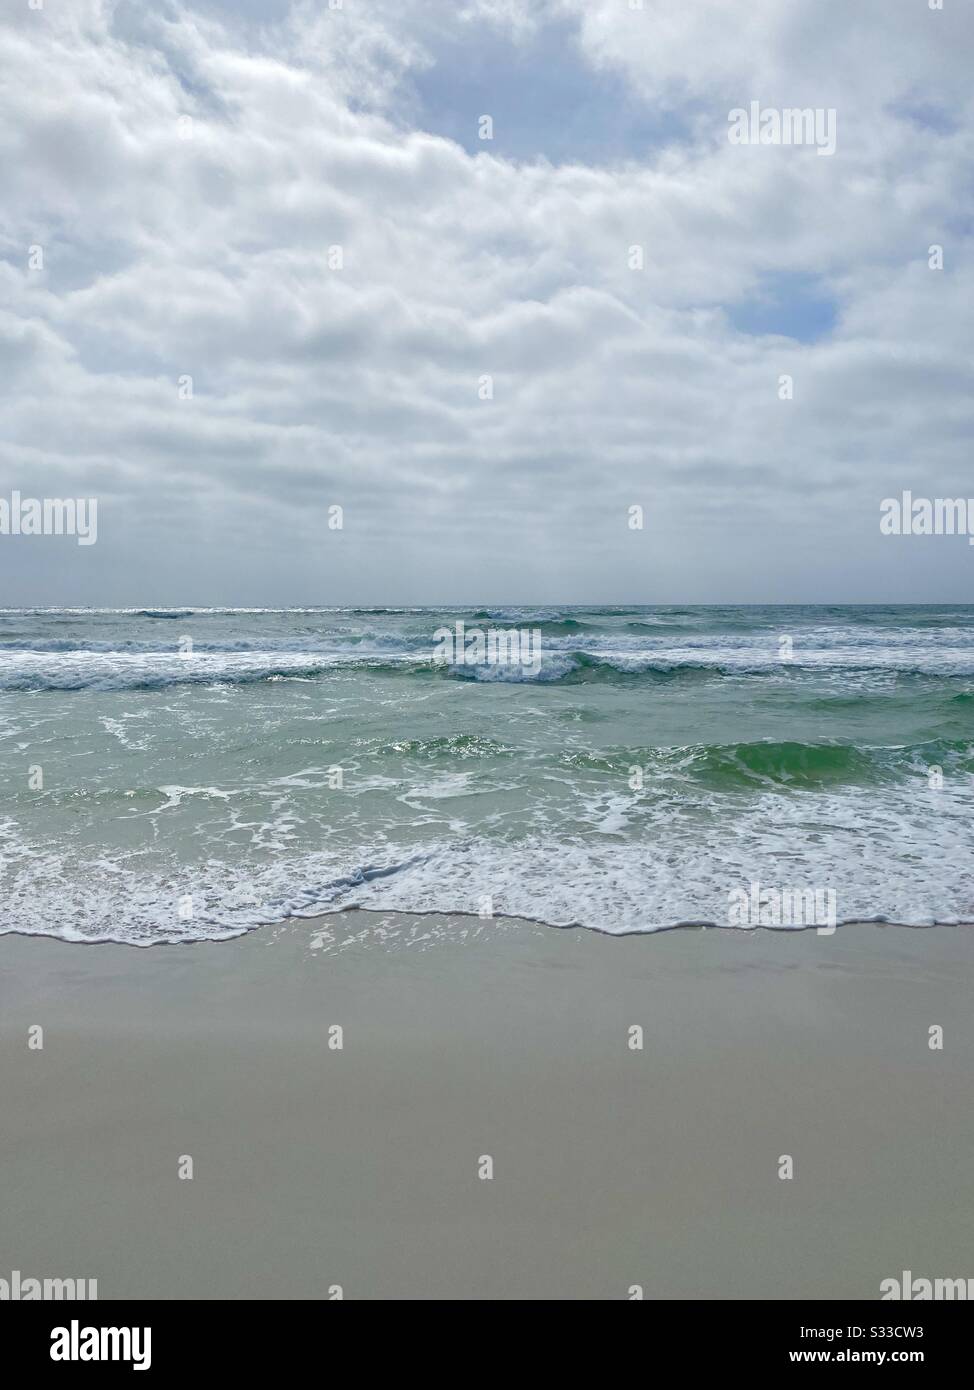 View of the Emerald colored water of Gulf of Mexico on Destin, Florida beach Stock Photo